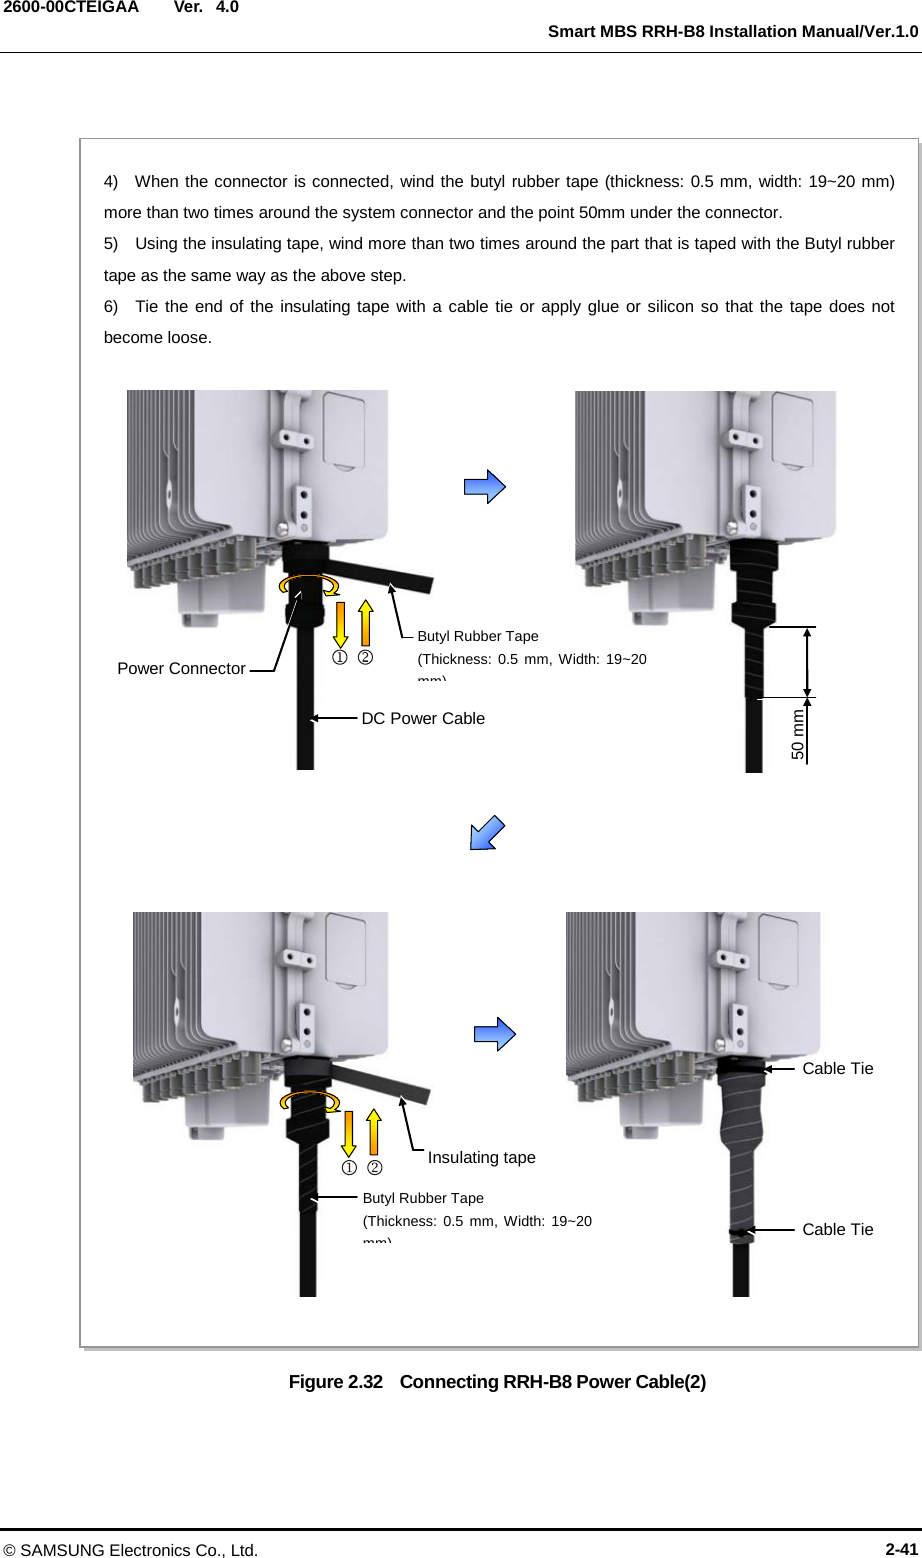  Ver.   Smart MBS RRH-B8 Installation Manual/Ver.1.0 2600-00CTEIGAA 4.0 Figure 2.32    Connecting RRH-B8 Power Cable(2) Power Connector DC Power Cable 4)  When the connector is connected, wind the butyl rubber tape (thickness: 0.5 mm, width: 19~20 mm) more than two times around the system connector and the point 50mm under the connector. 5)    Using the insulating tape, wind more than two times around the part that is taped with the Butyl rubber tape as the same way as the above step. 6)  Tie the end of the insulating tape with a cable tie or apply glue or silicon so that the tape does not become loose.      Butyl Rubber Tape (Thickness: 0.5 mm, Width: 19~20 mm)  50 mm Cable Tie Insulating tape     Butyl Rubber Tape (Thickness: 0.5 mm, Width: 19~20 mm)  Cable Tie © SAMSUNG Electronics Co., Ltd. 2-41 